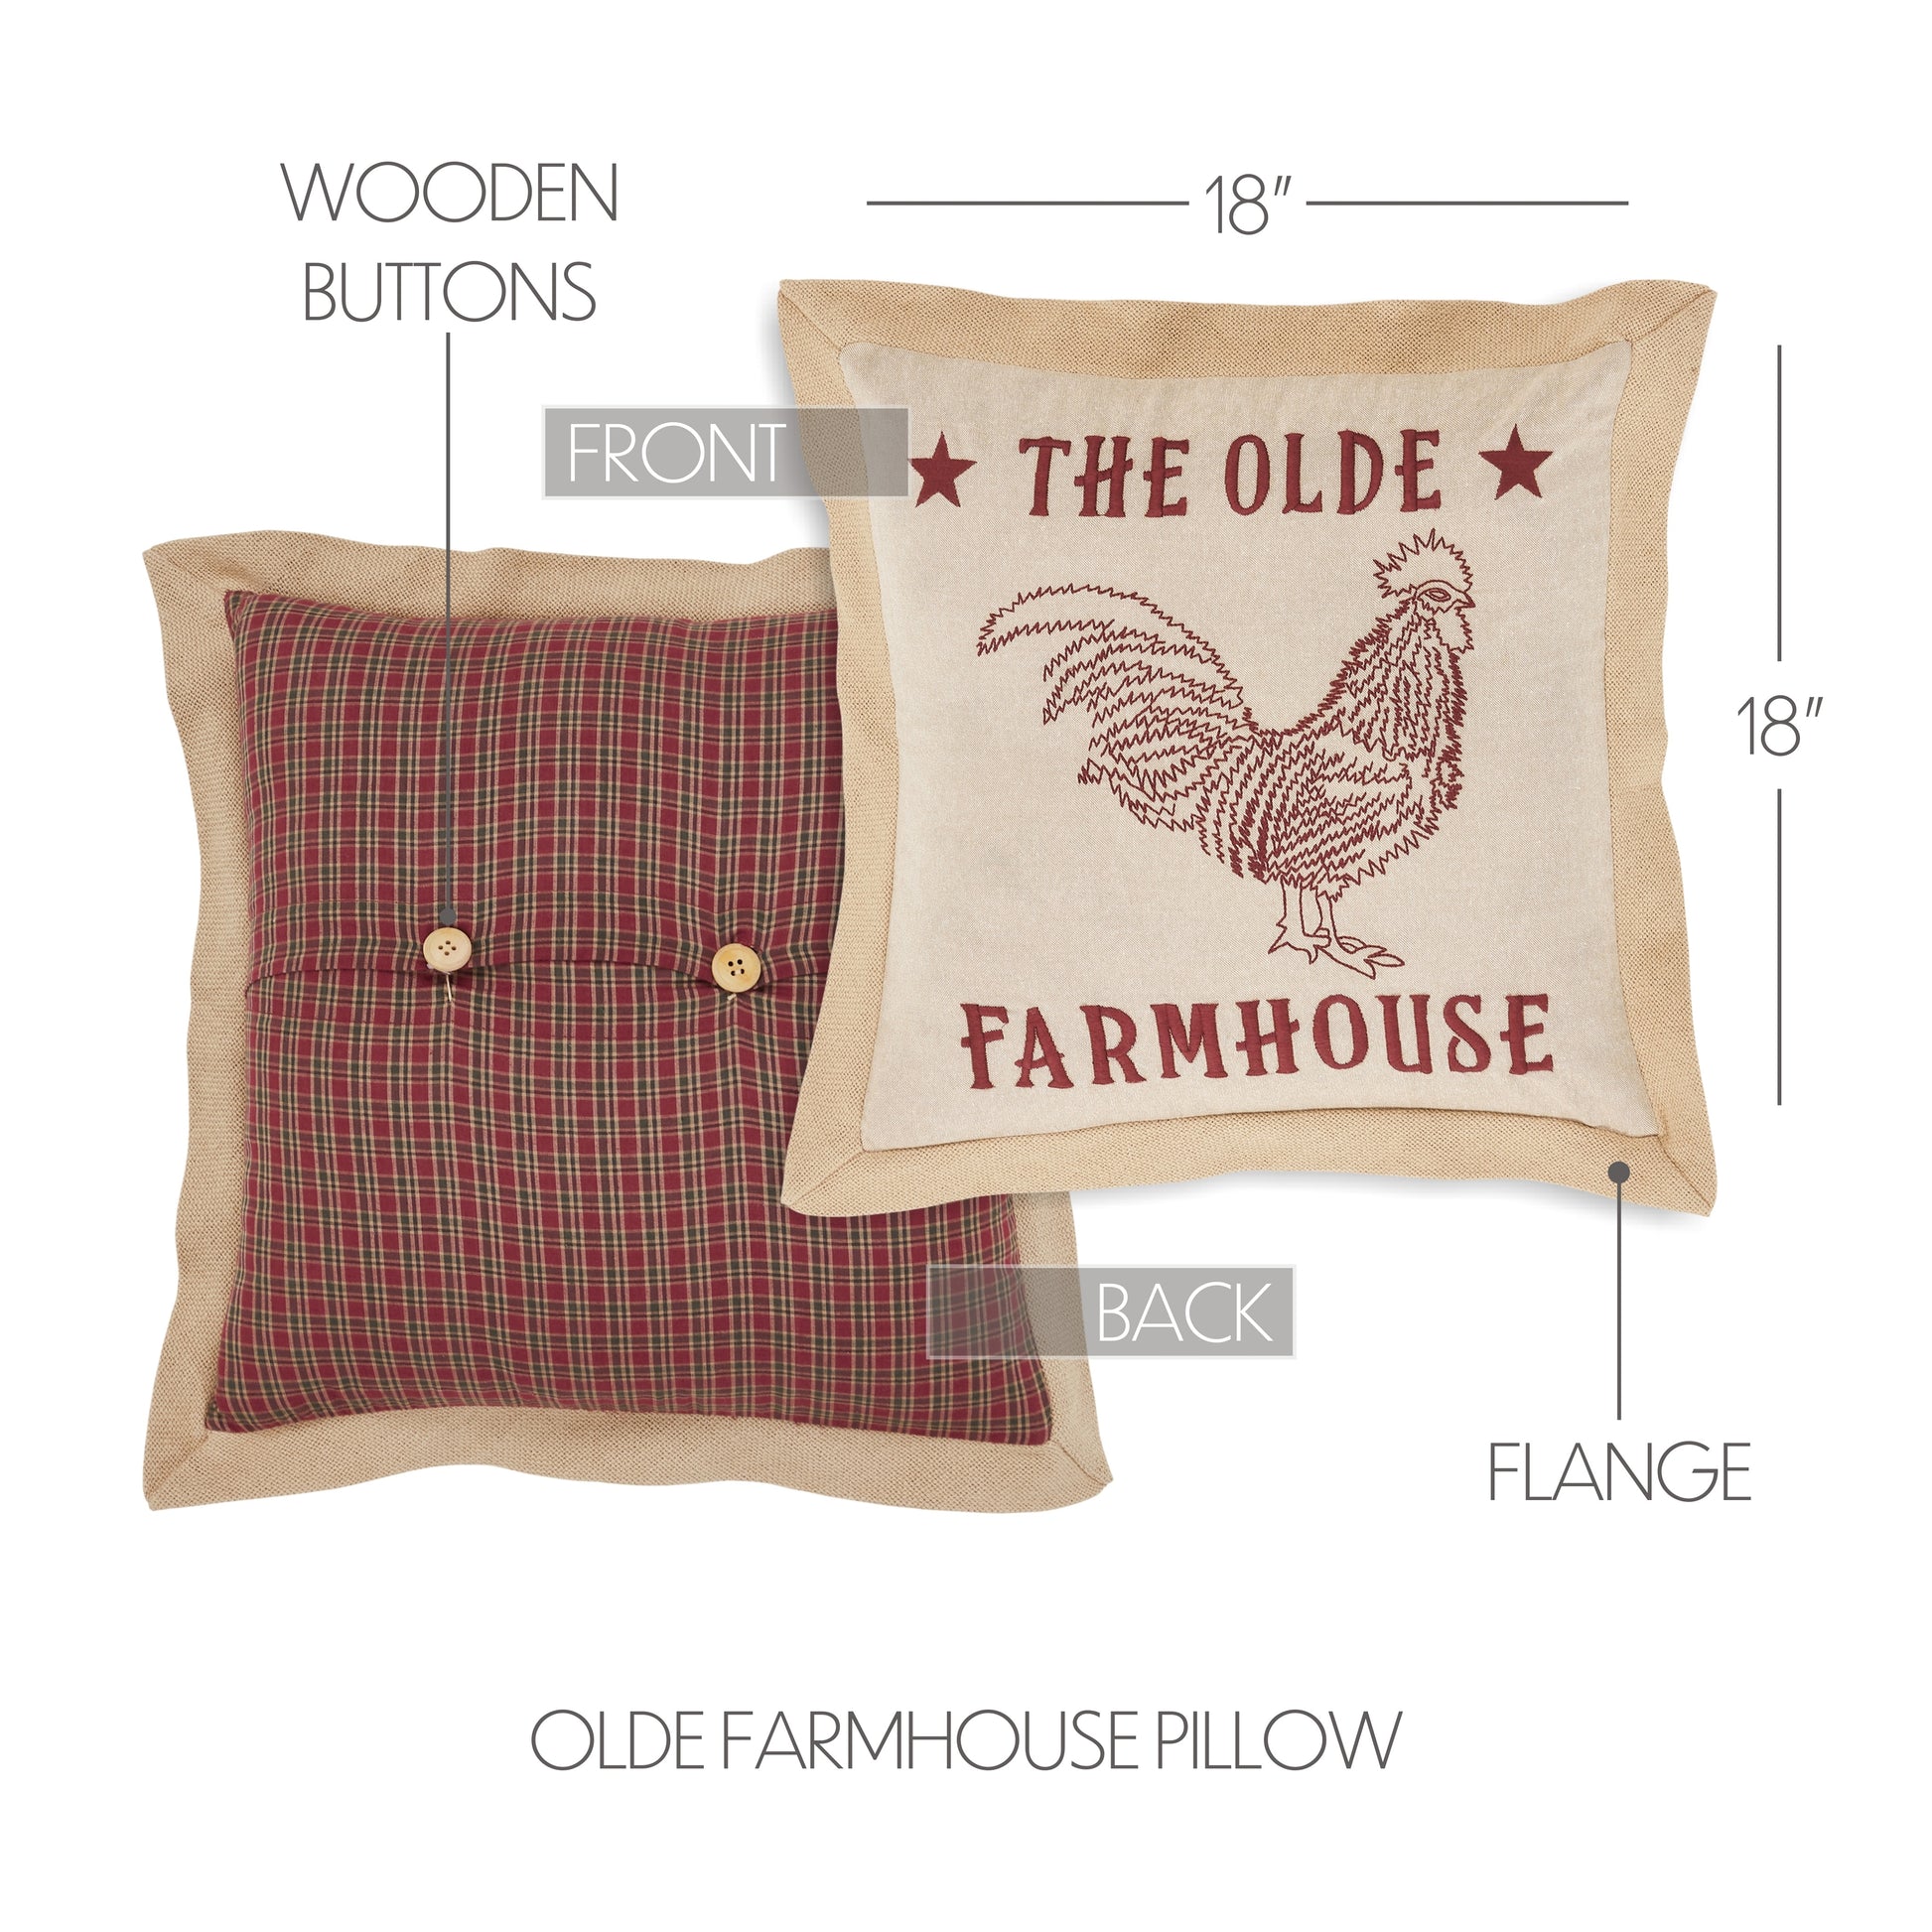 80326-Cider-Mill-Olde-Farmhouse-Pillow-18x18-image-1